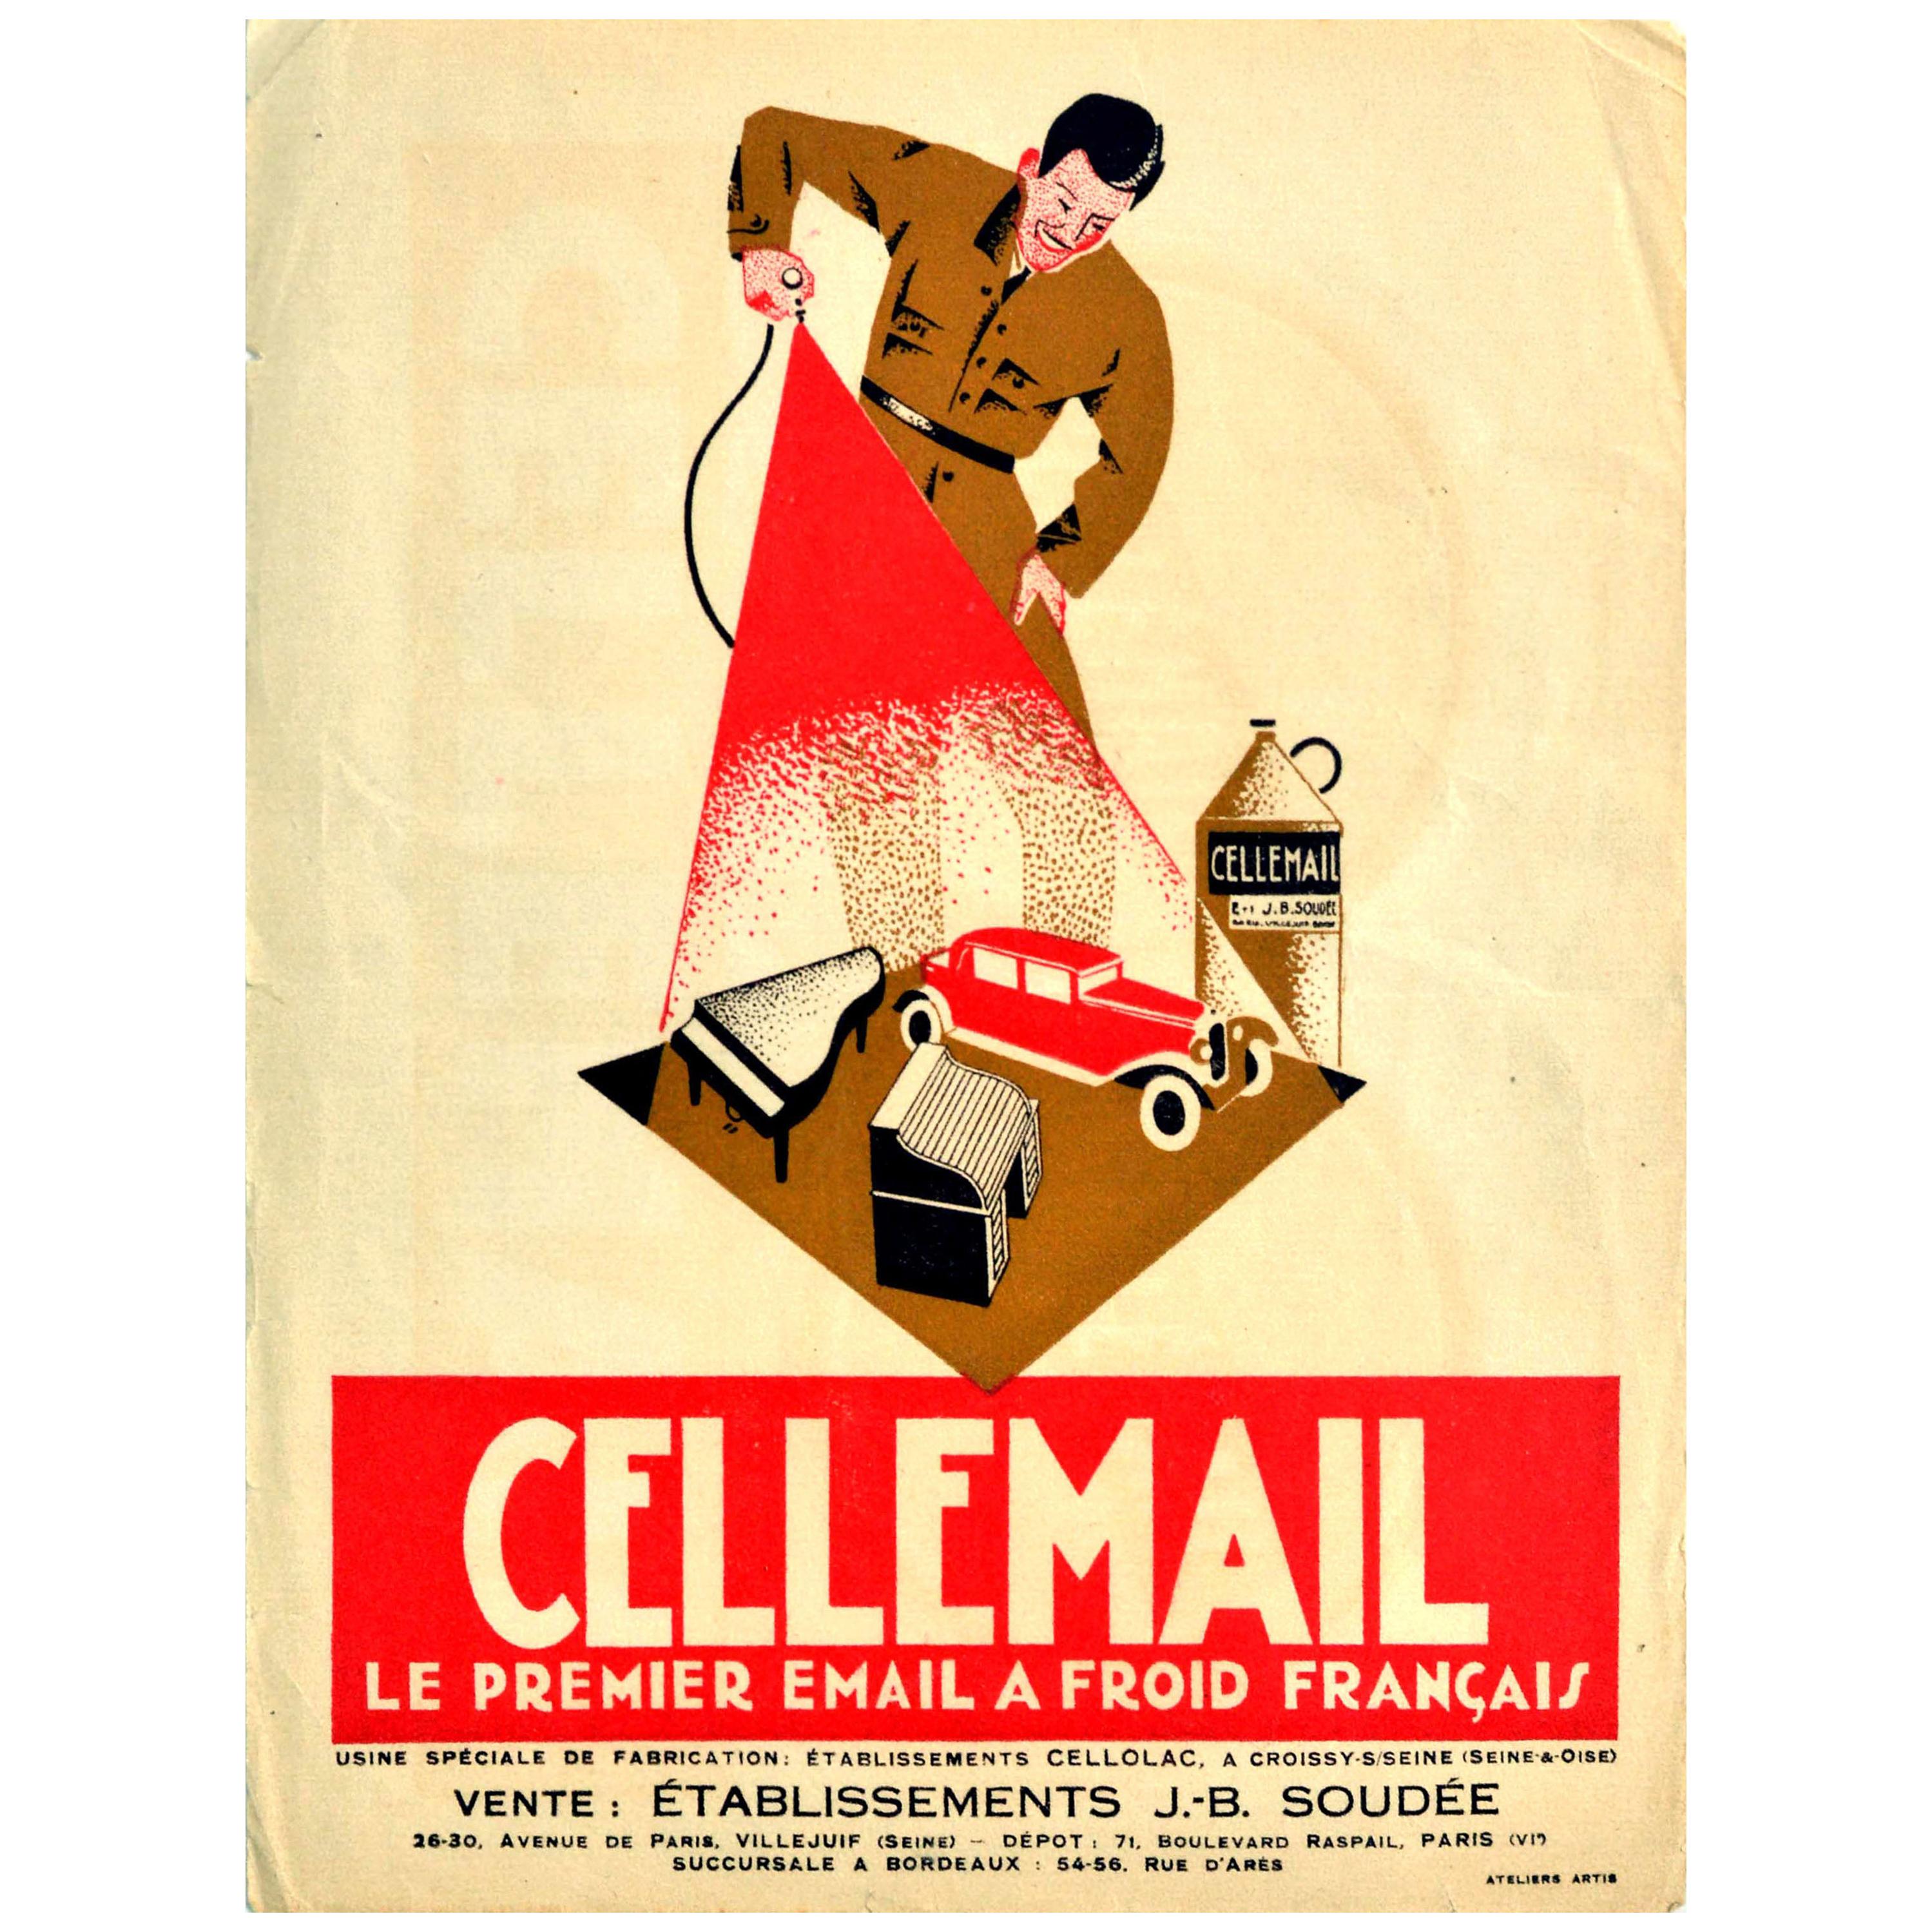 Original Antike Poster Cellemail Le Premier Email A Froid Francais Emaille-Farbe im Angebot